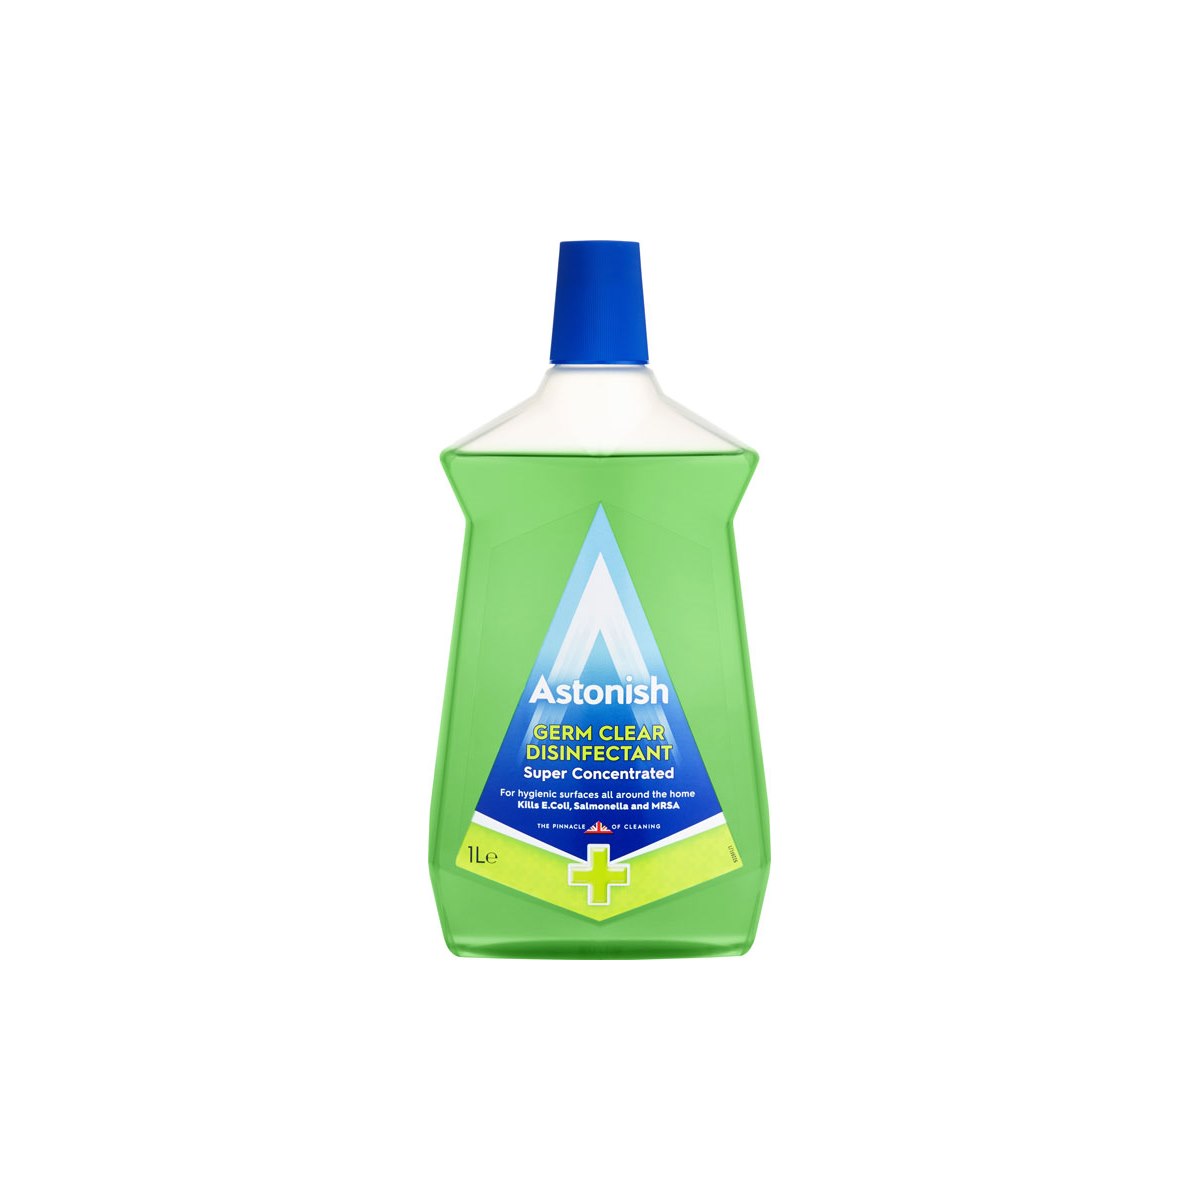 Astonish Germ Clear Disinfectant Super Concentrated 1 Litre